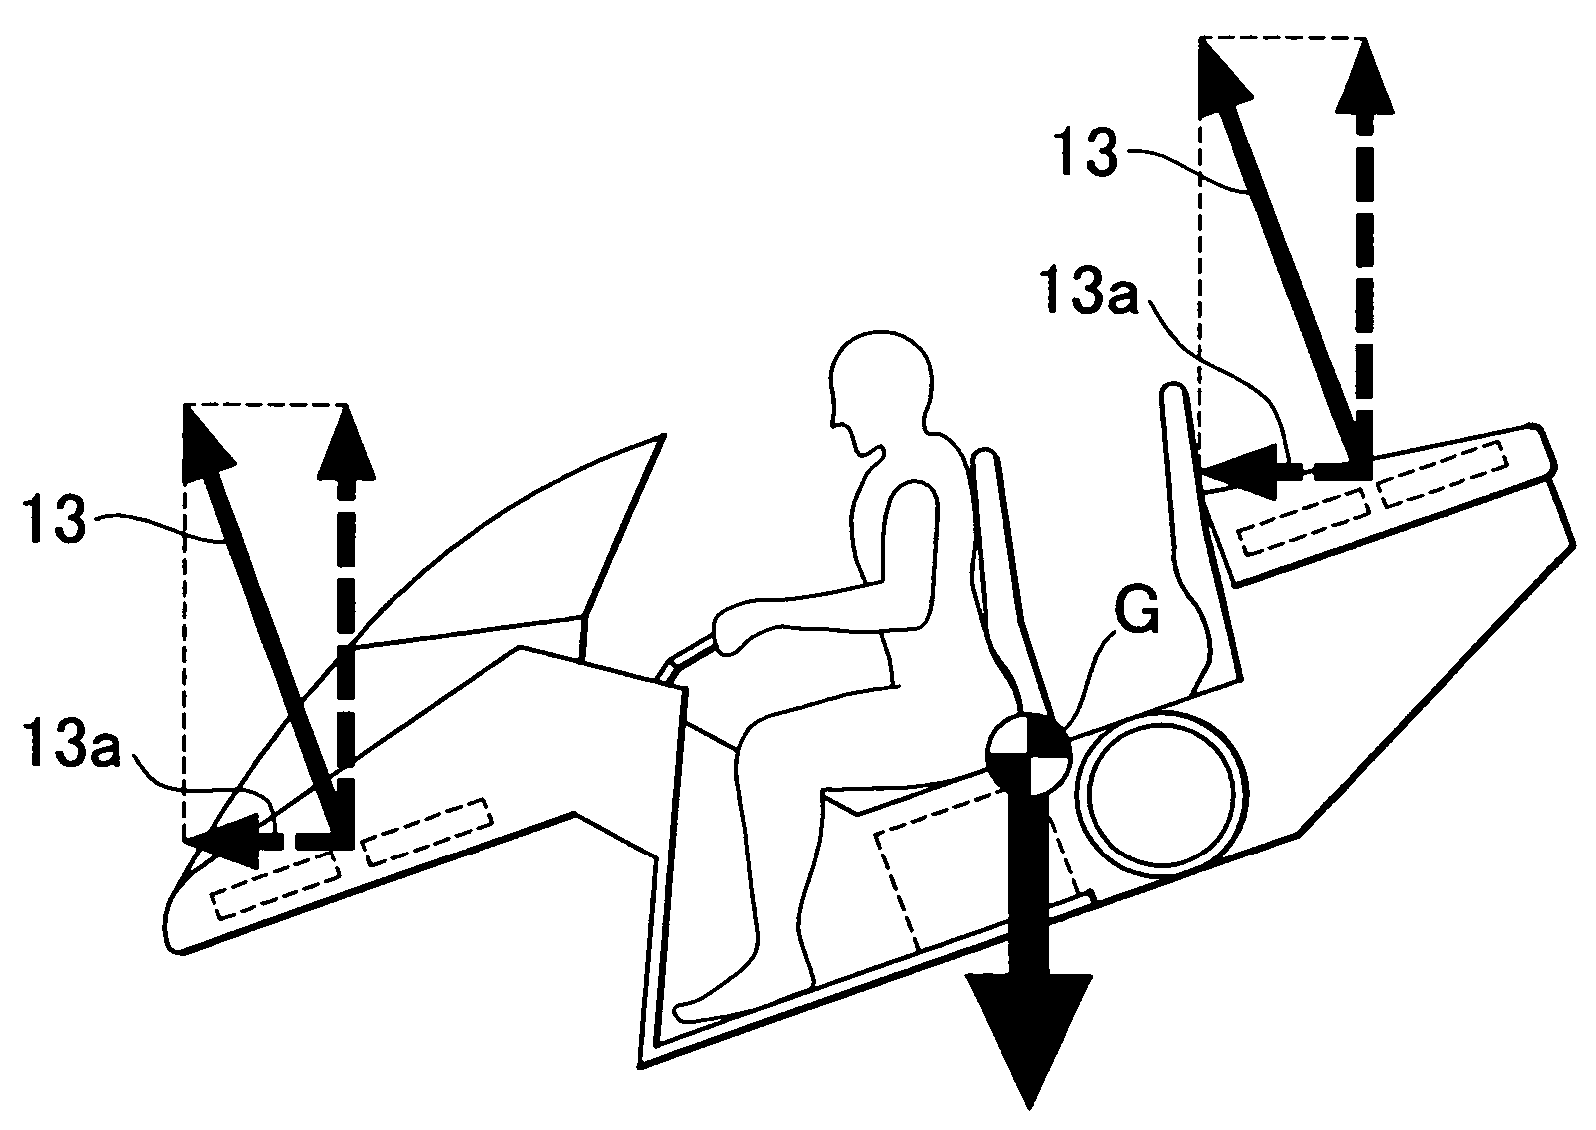 Vertical take-off and landing aircraft